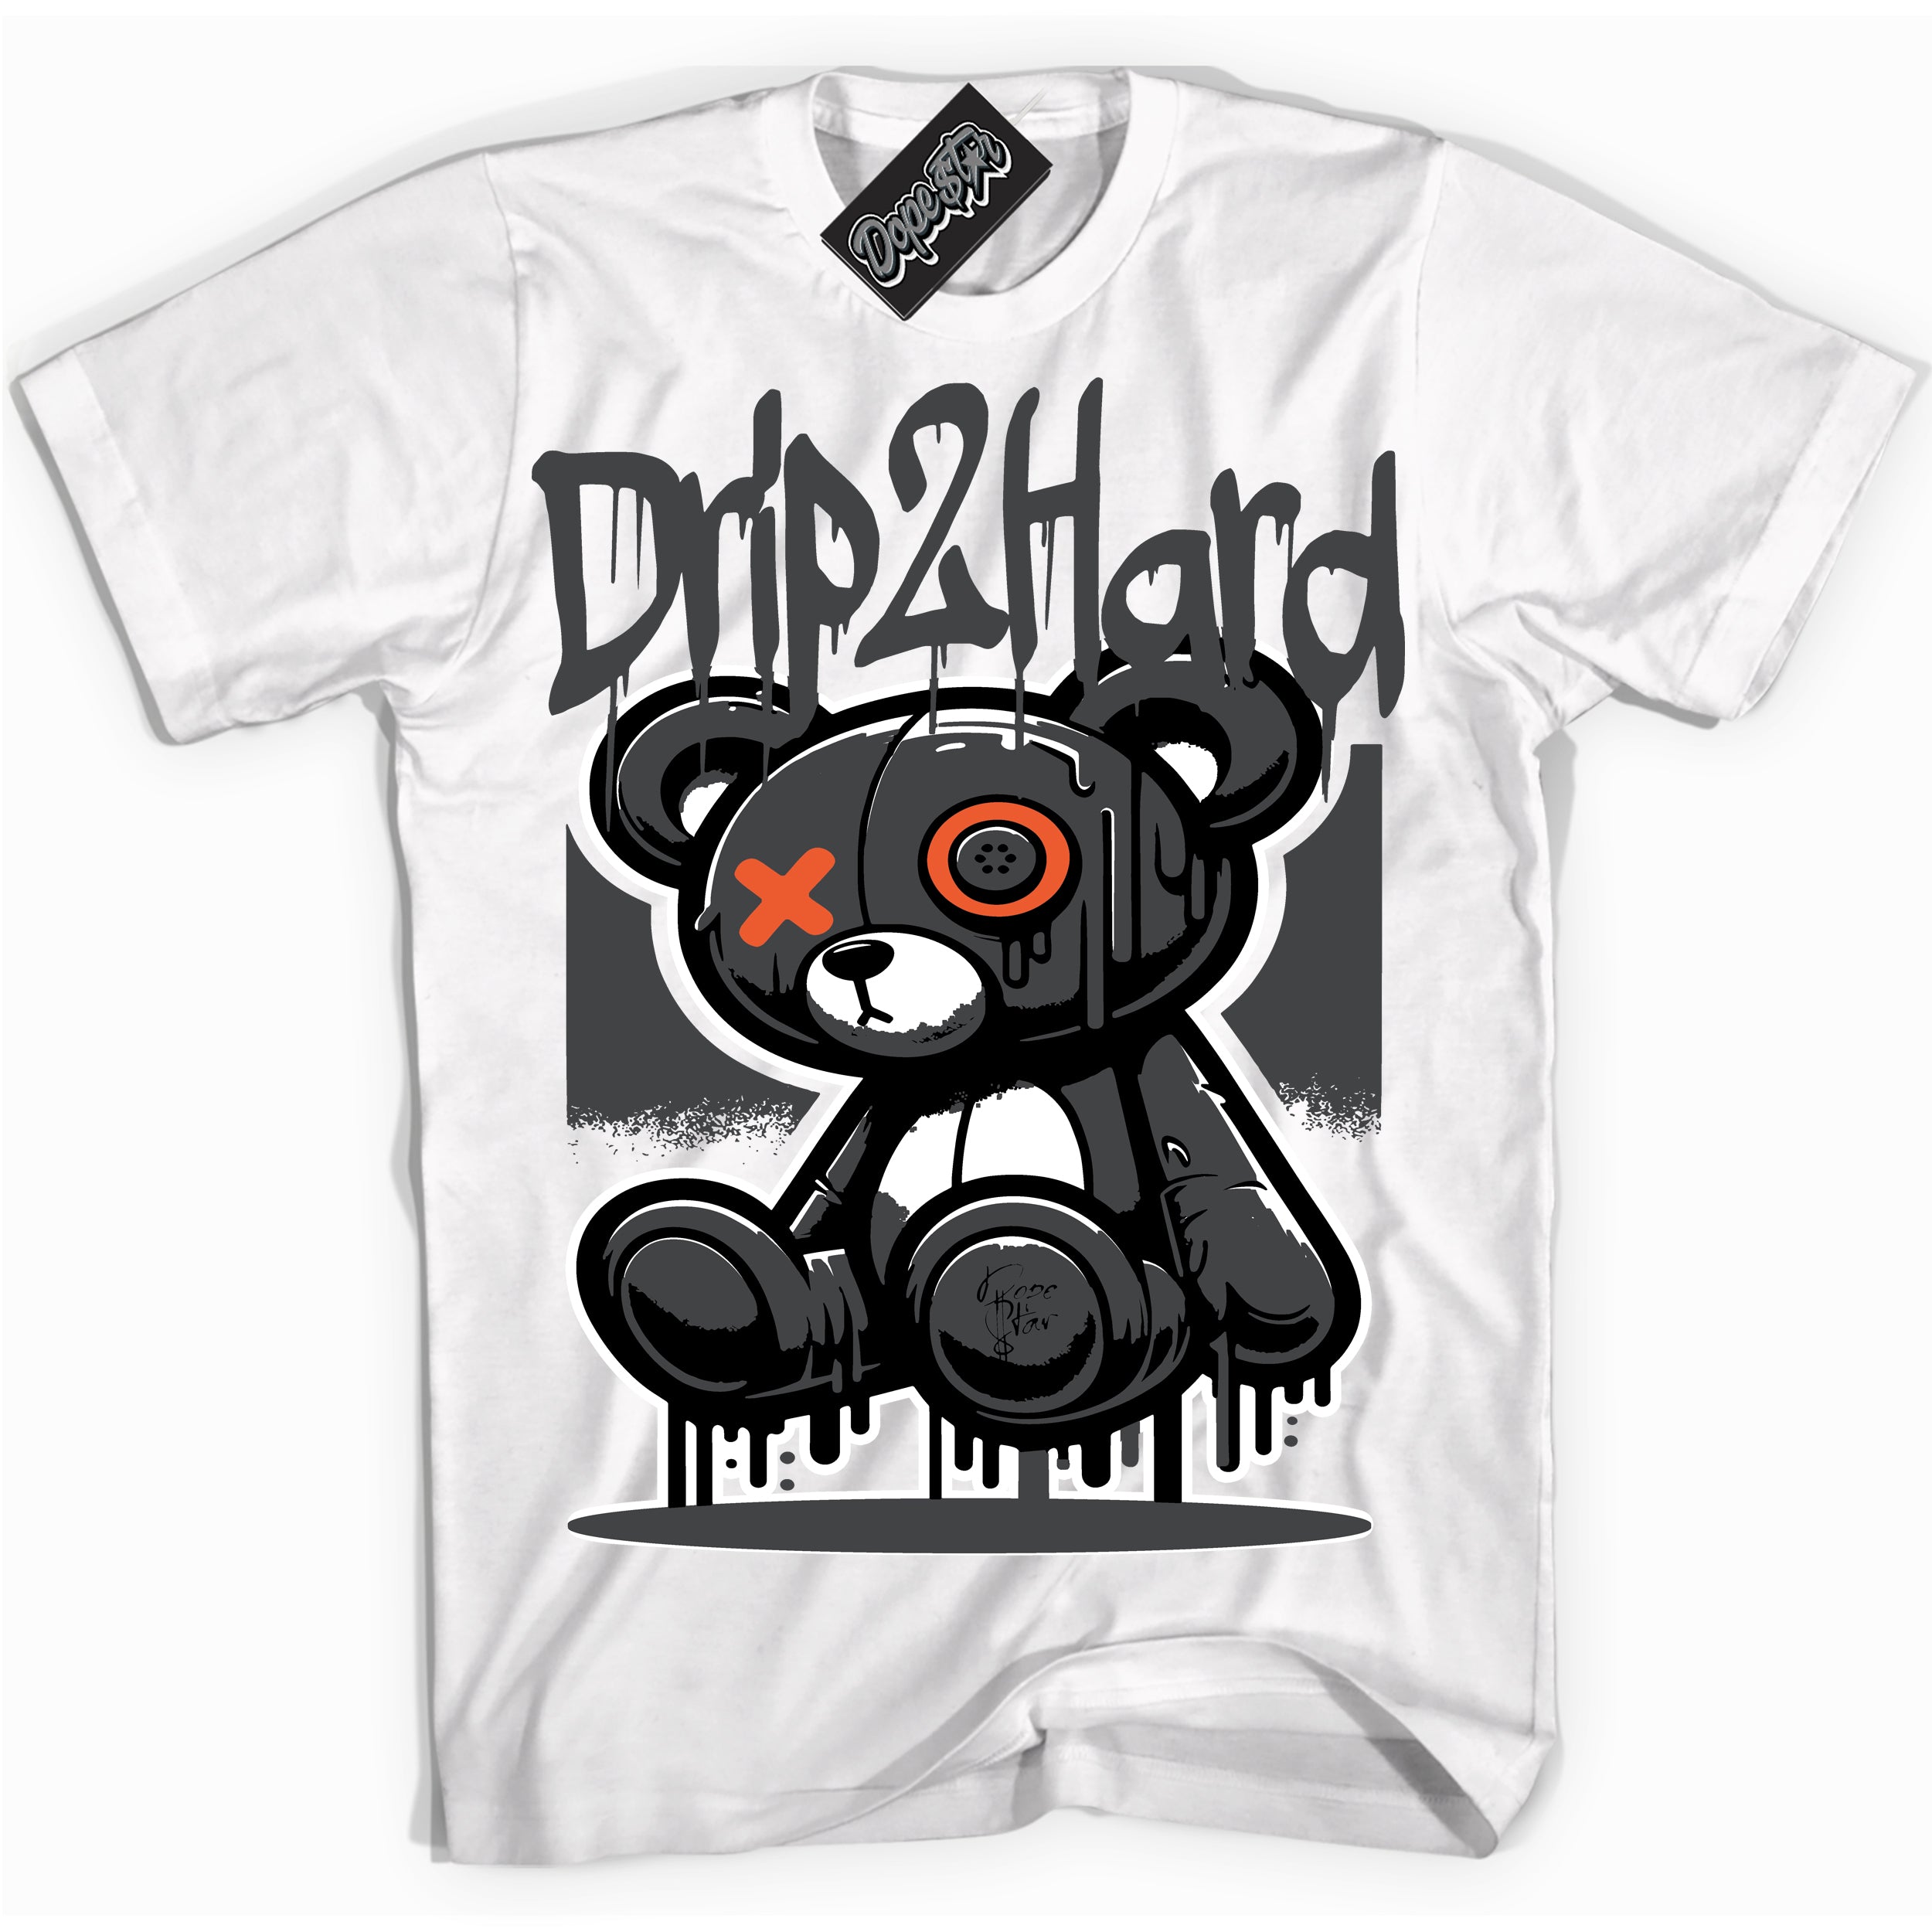 Cool White graphic tee with “ Drip 2 Hard ” design, that perfectly matches Stash 1s